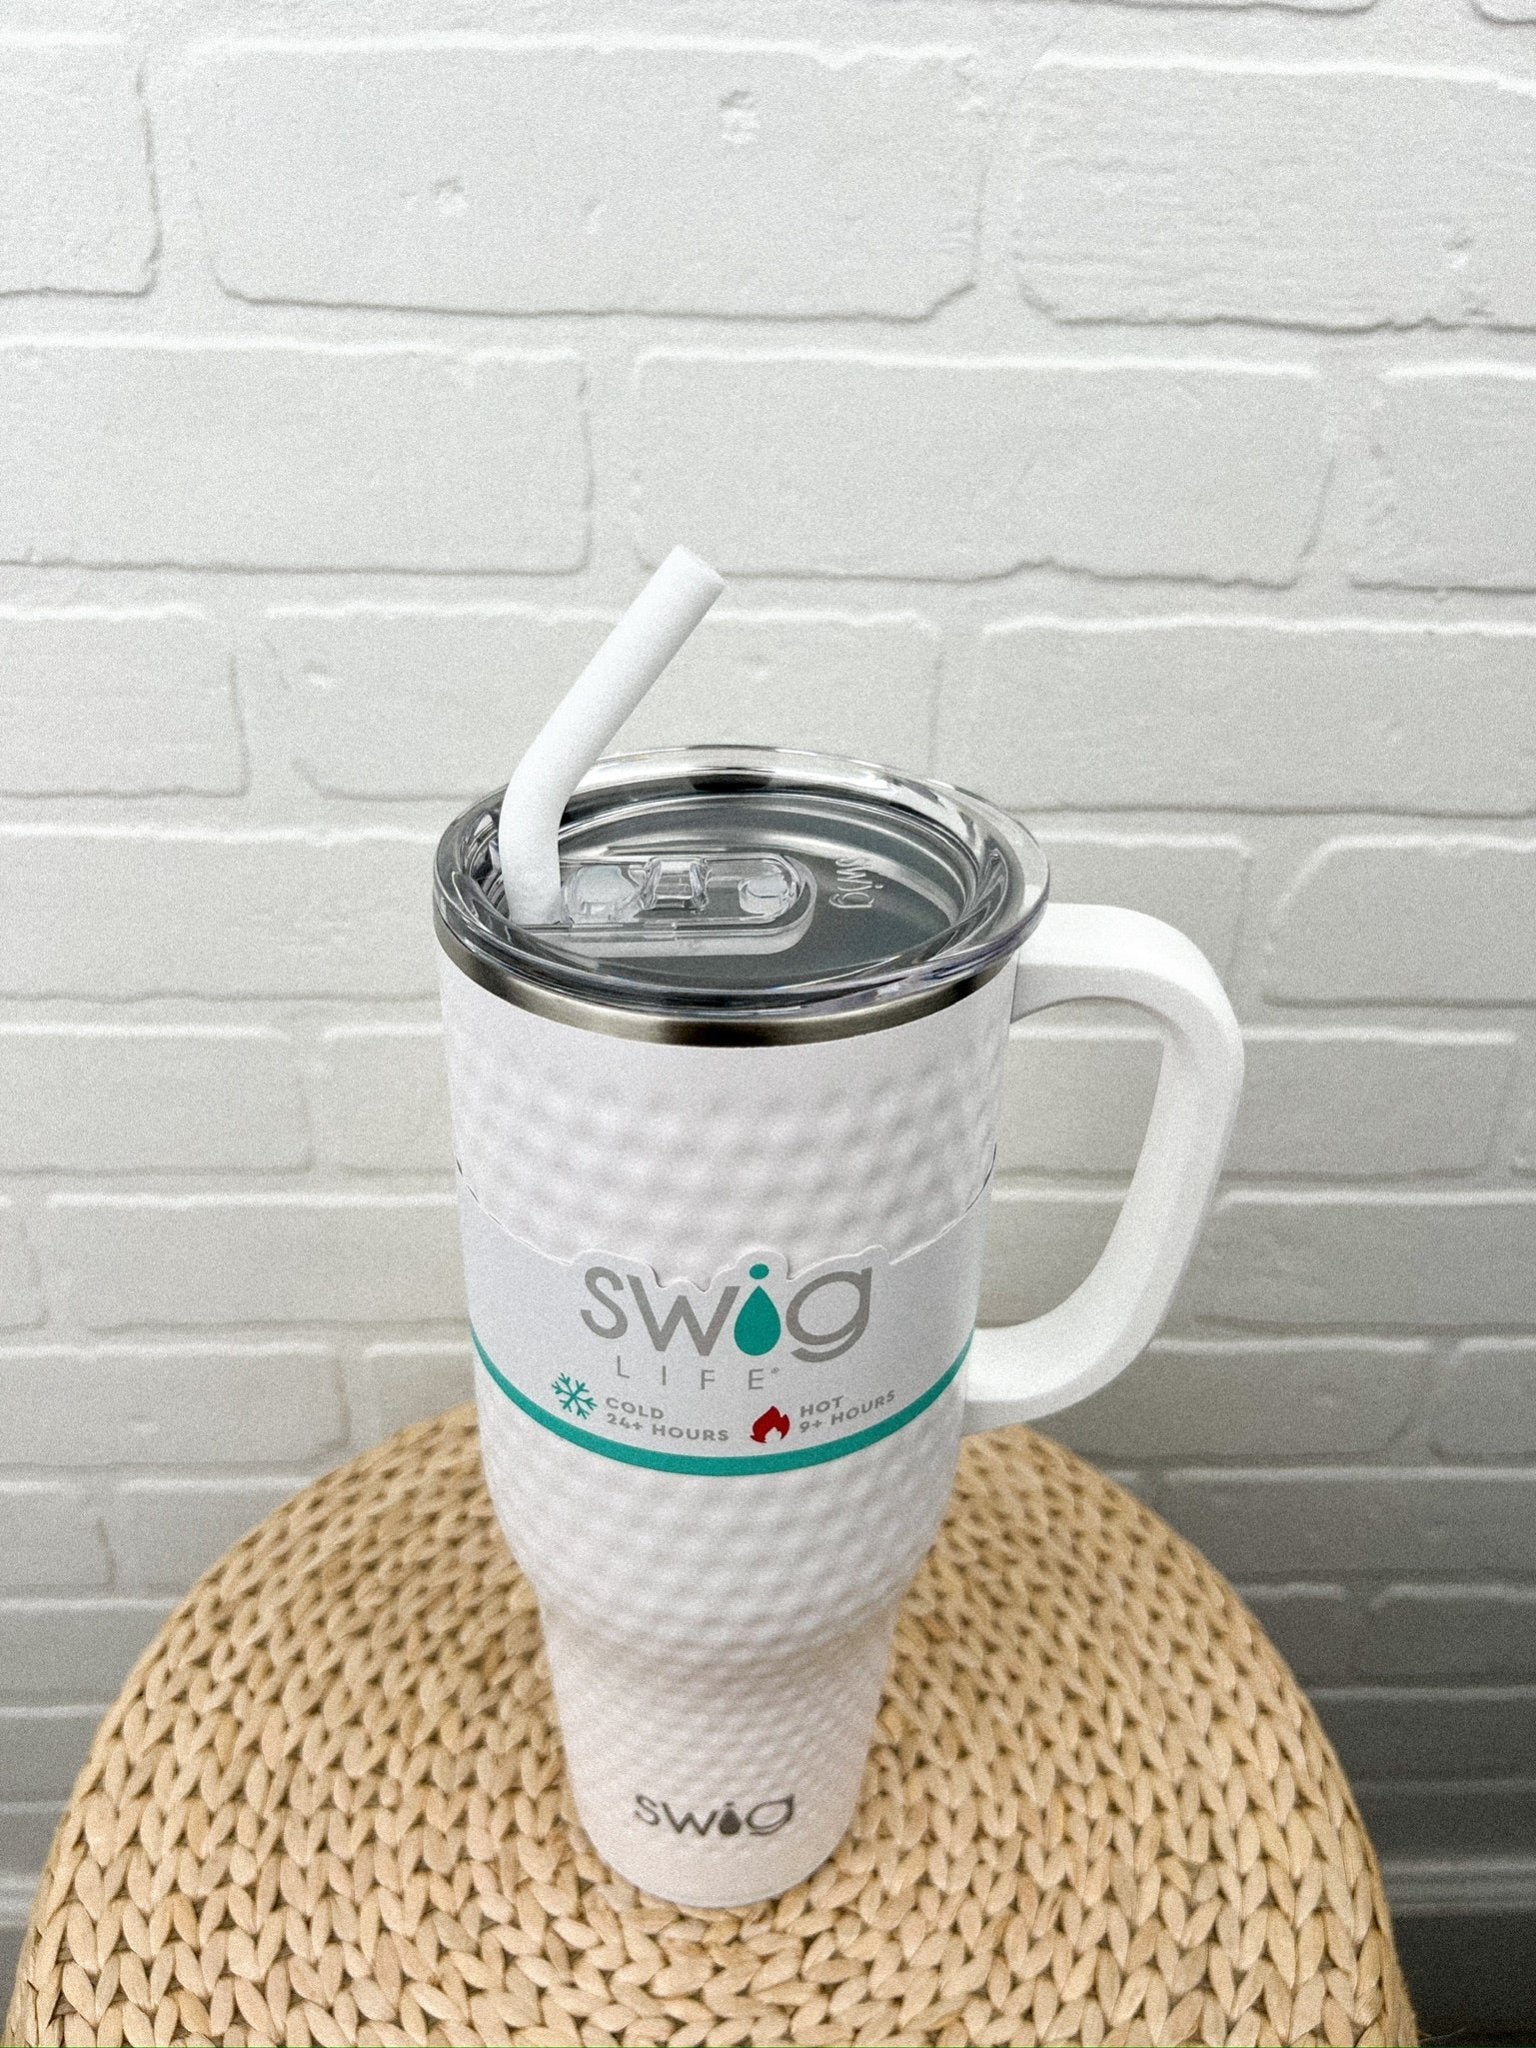 Swig golf 40oz tumbler - Trendy Tumblers, Mugs and Cups at Lush Fashion Lounge Boutique in Oklahoma City